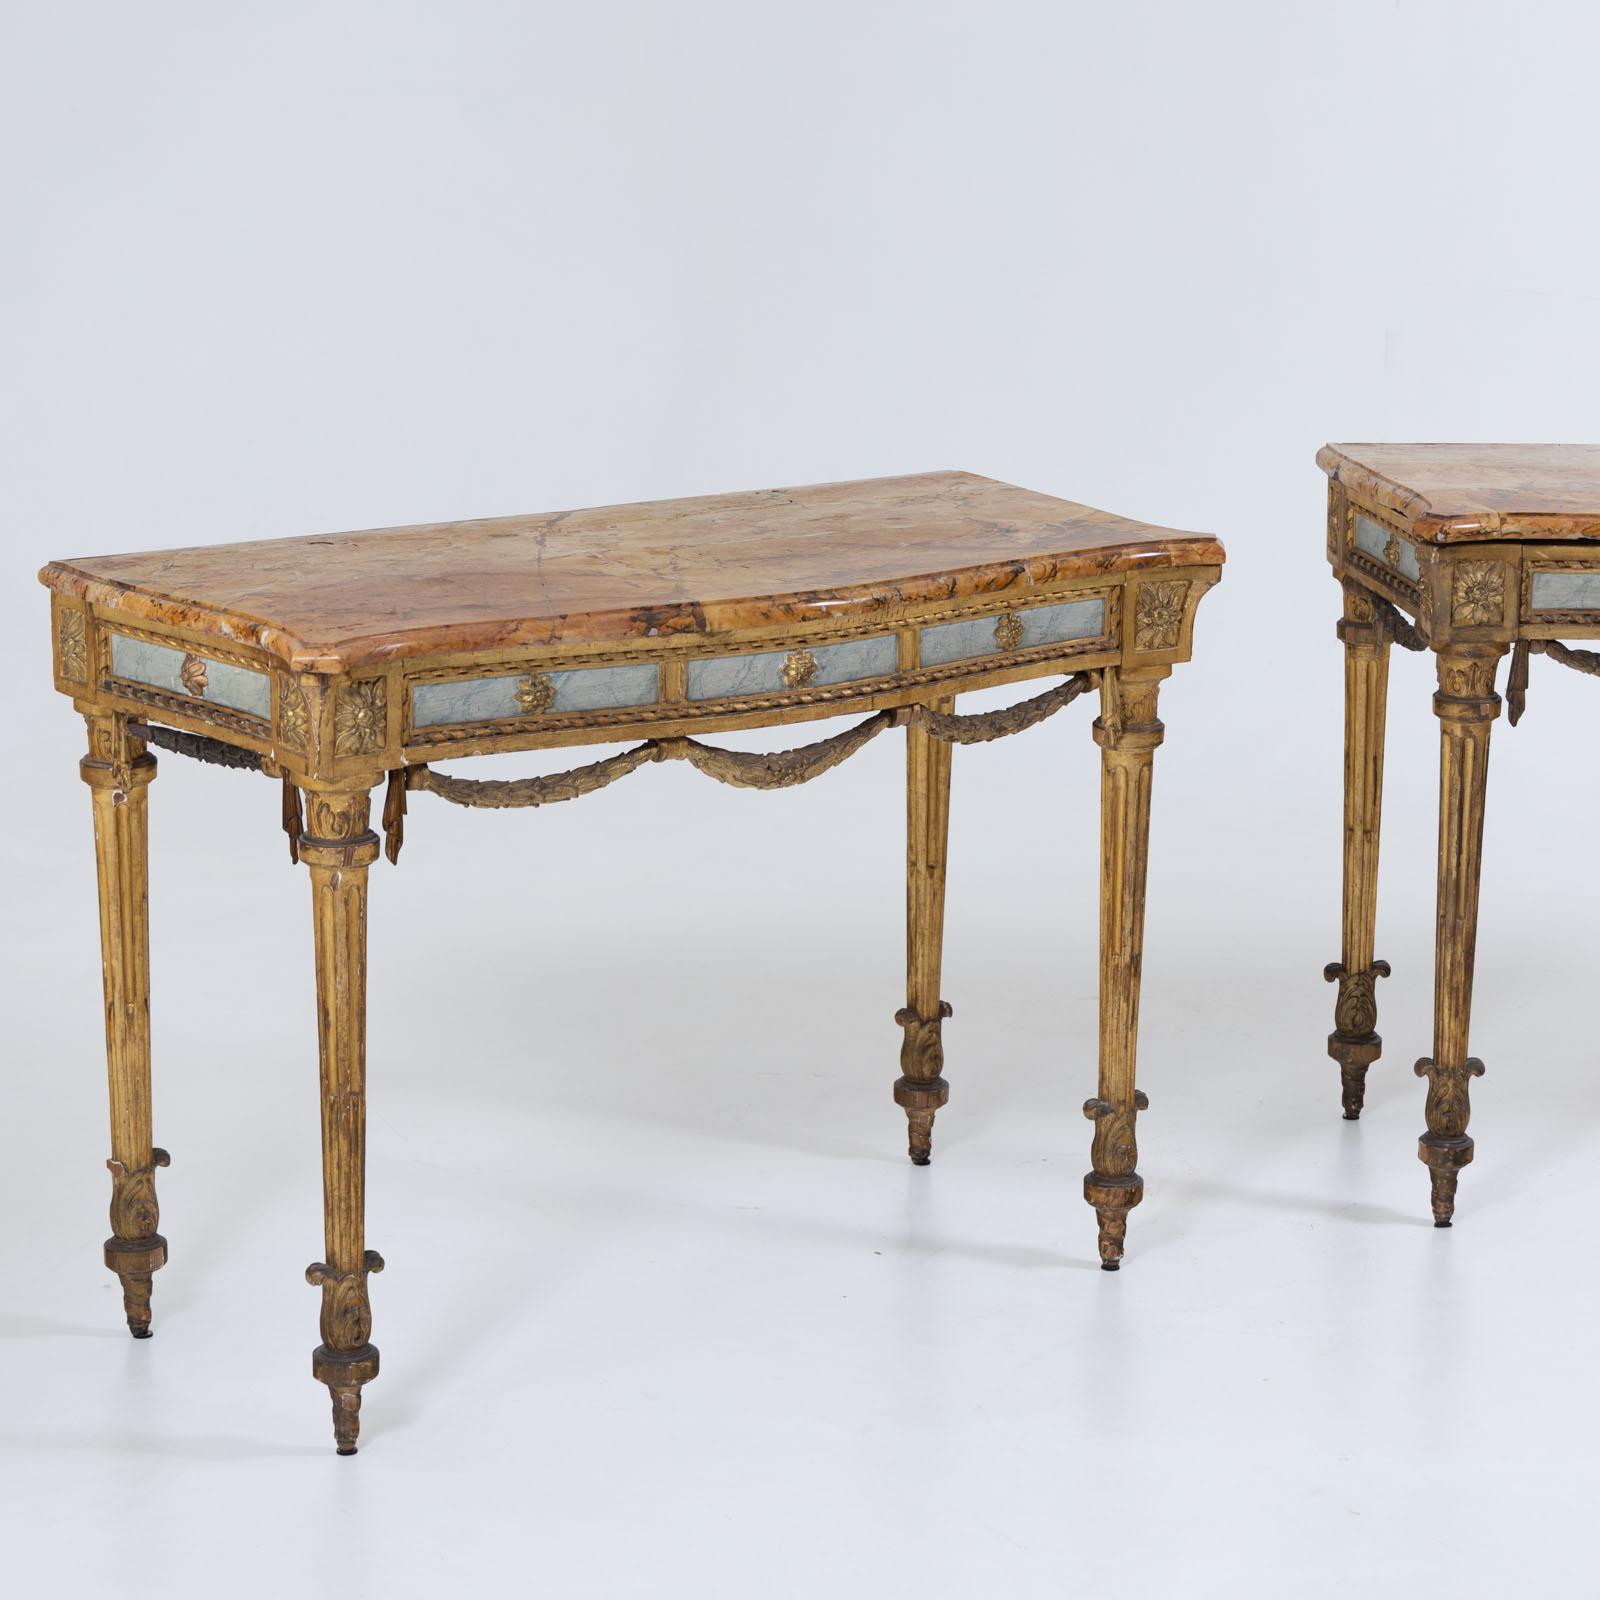 Neoclassical Revival Pair of giltwood consoles with marble tops, 19th Century For Sale